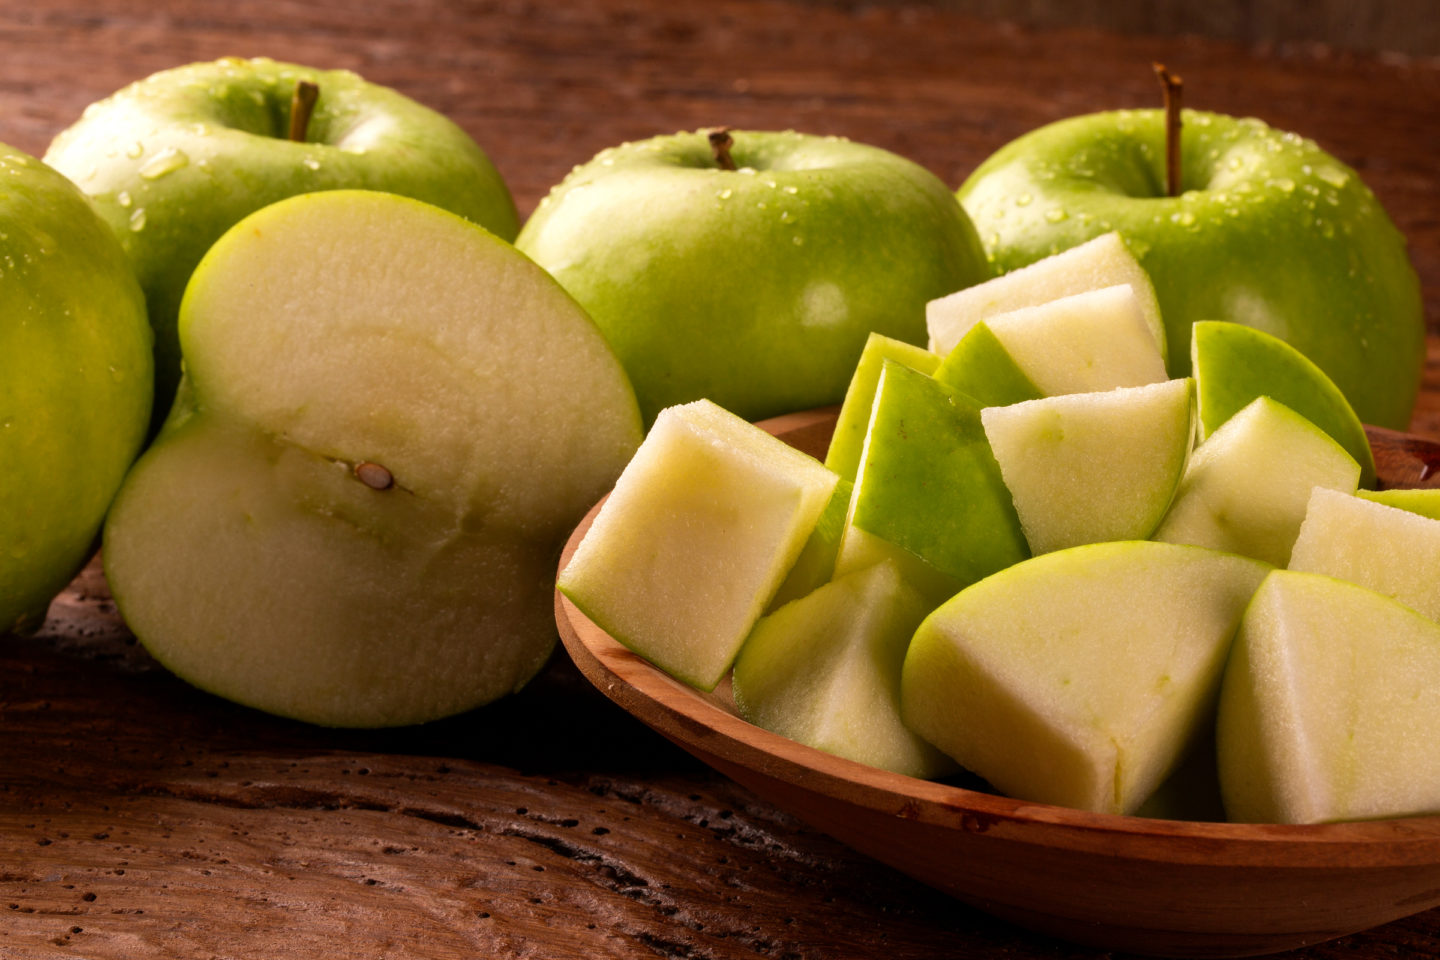 fresh green apples diced and whole